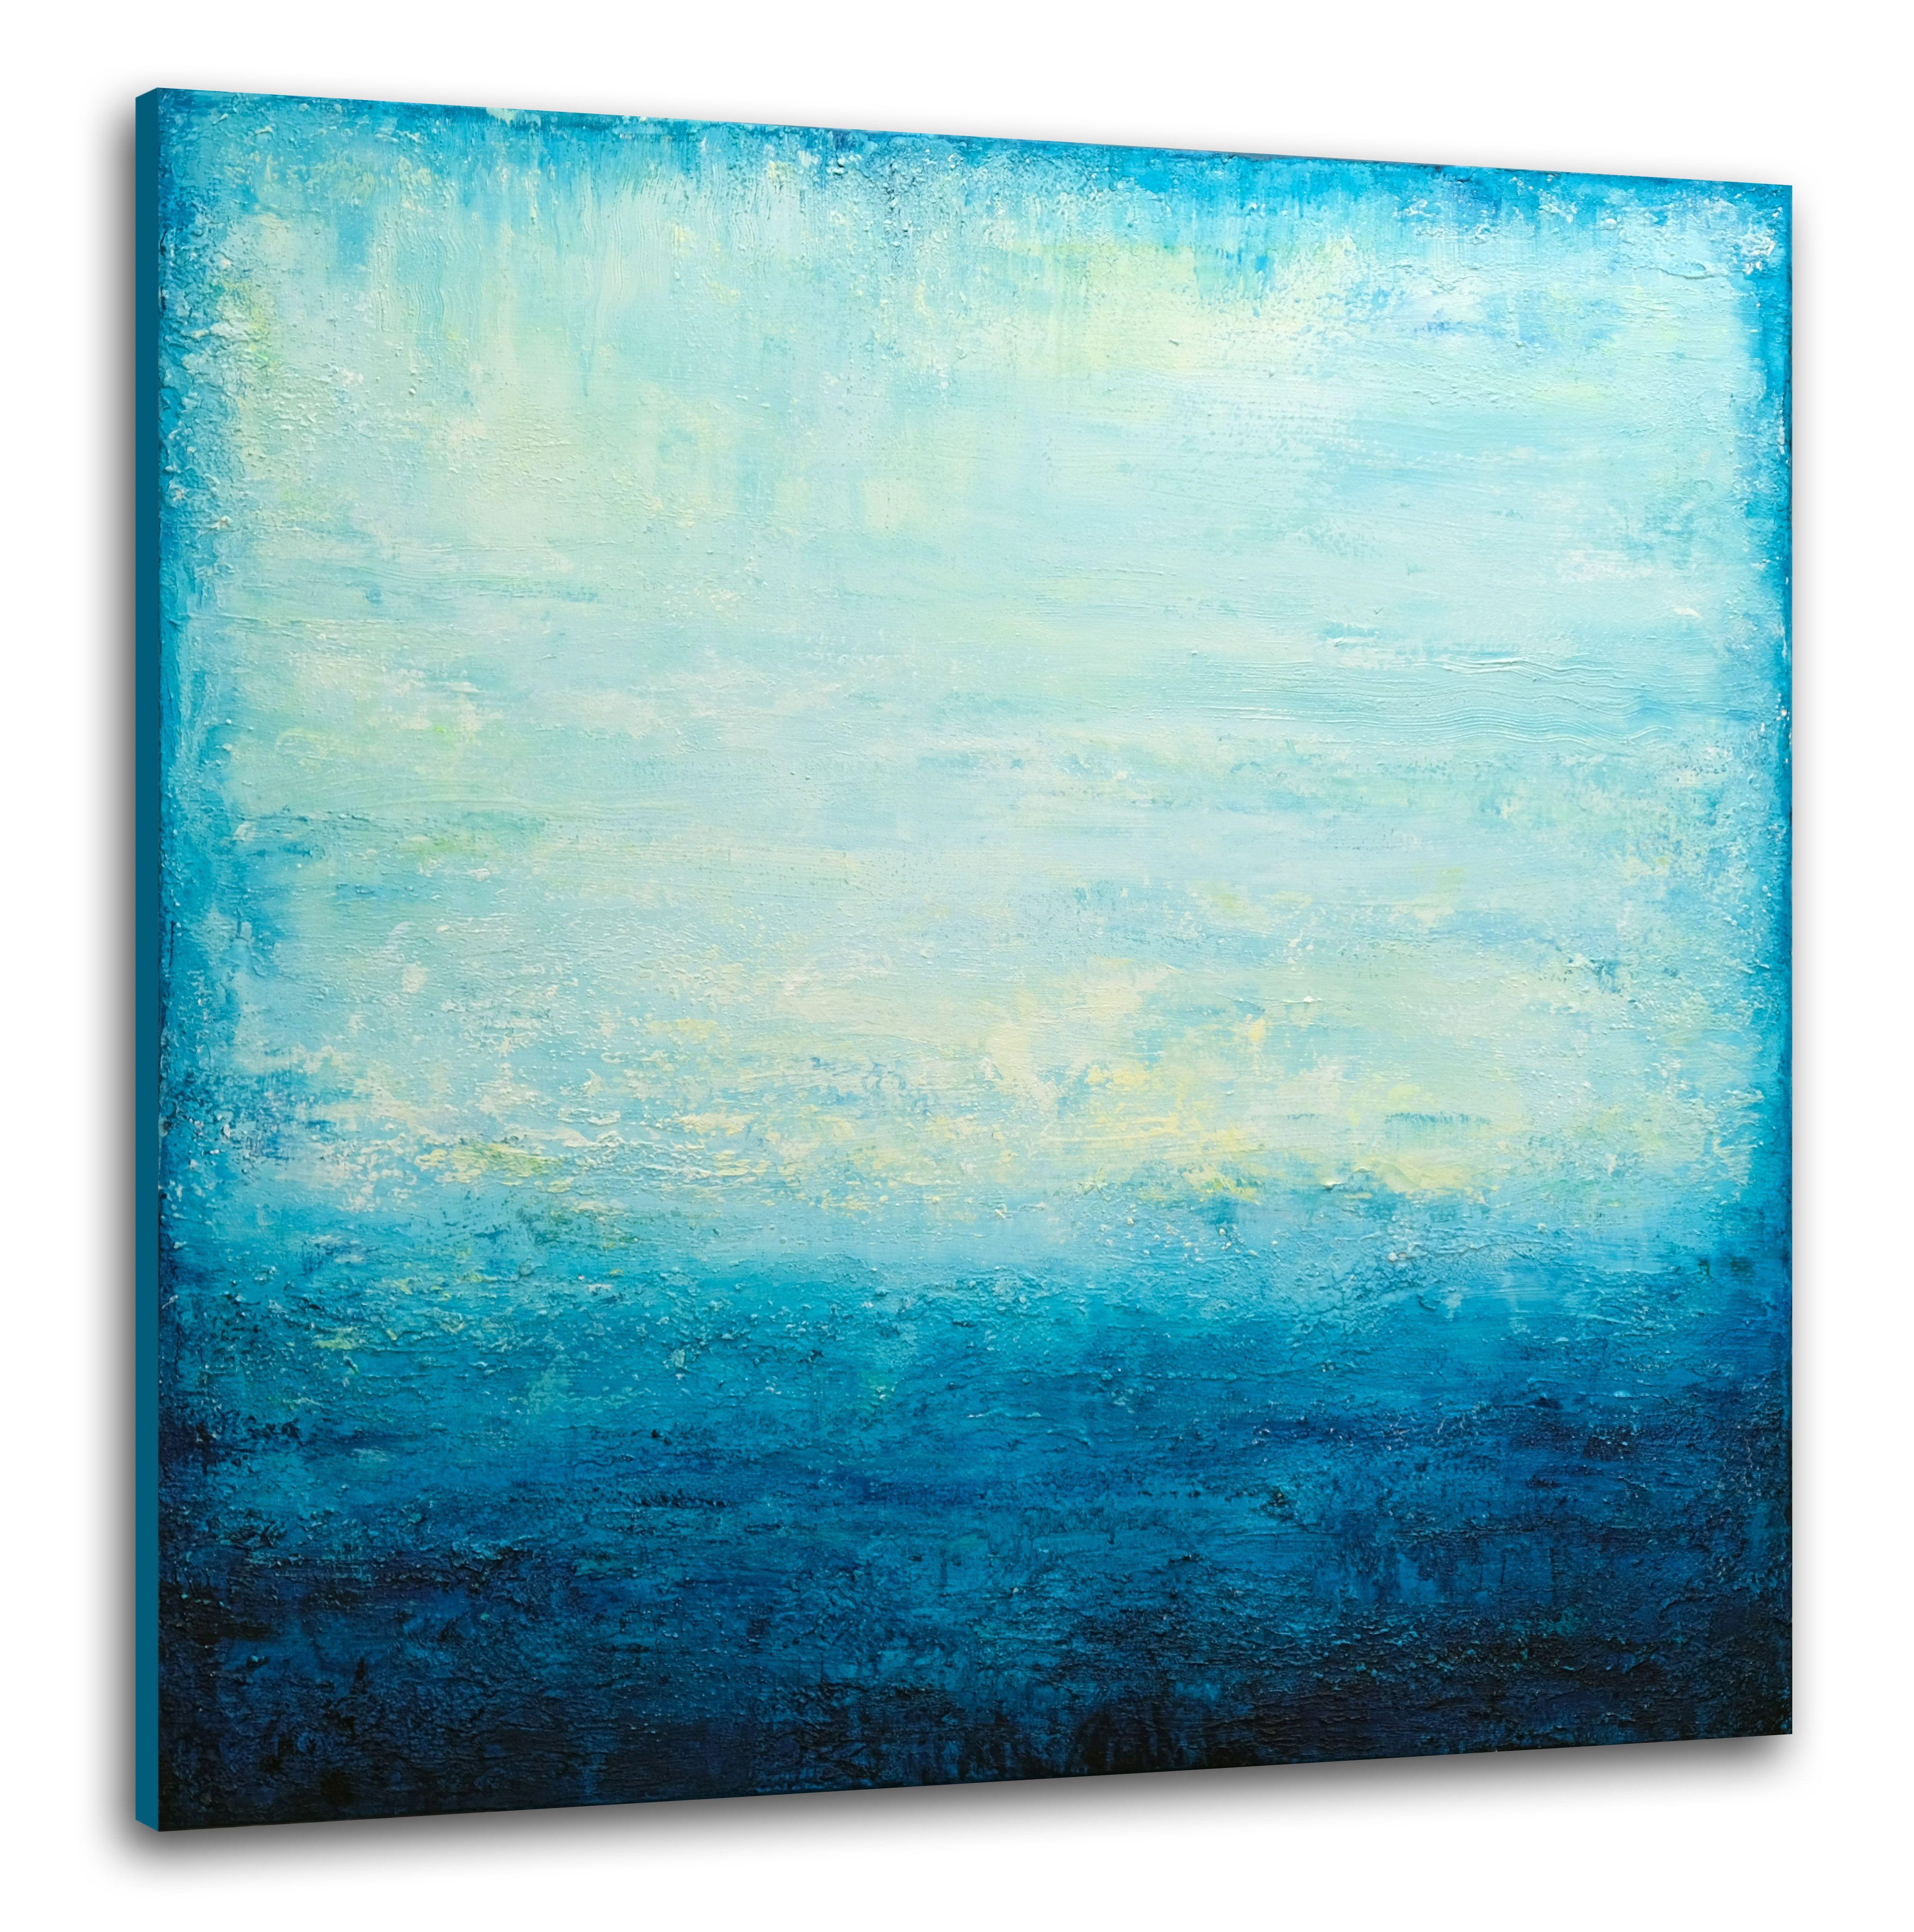 Turquoise Ocean, Painting, Acrylic on Canvas 3